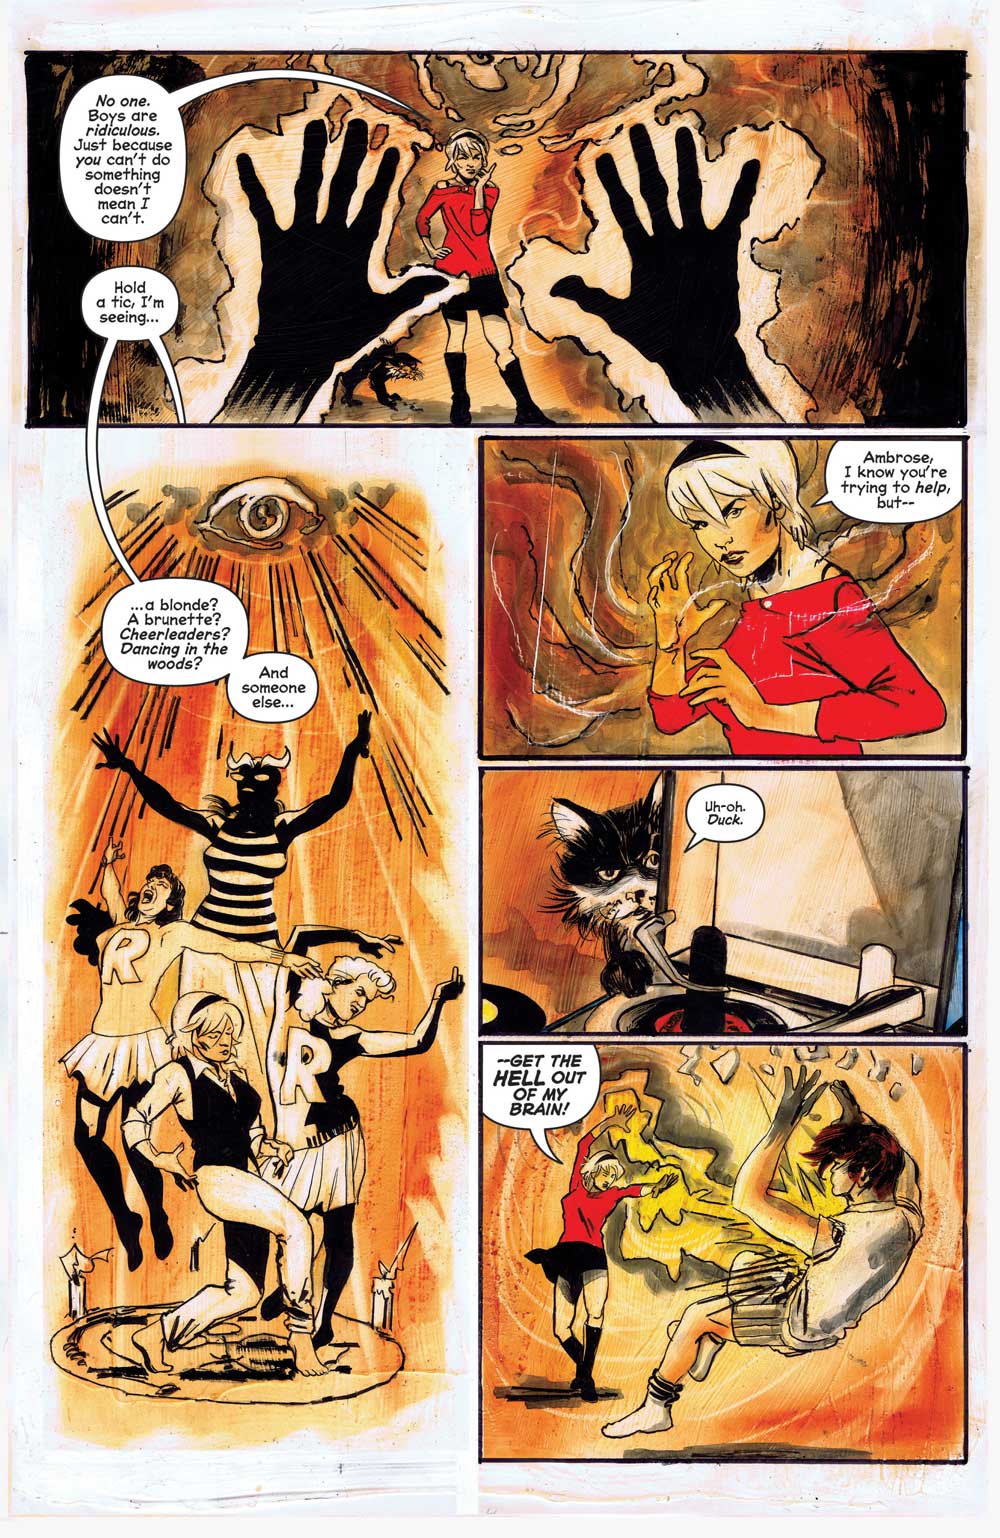 CHILLING ADVENTURES OF SABRINA #8 preview – First Comics News